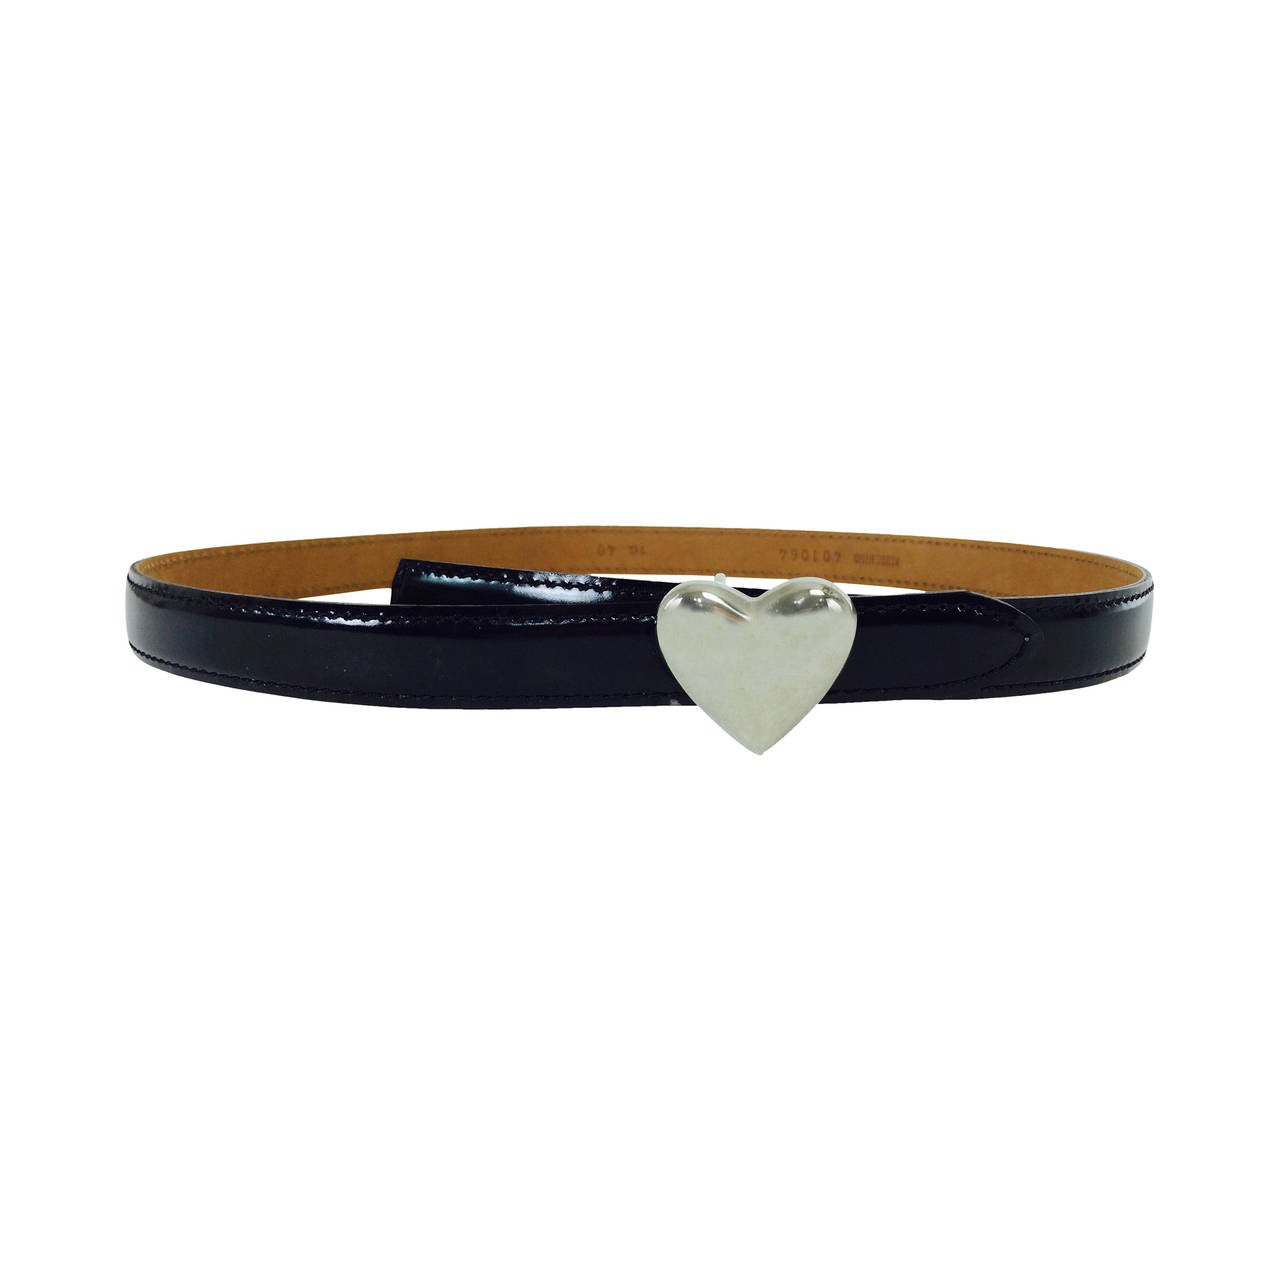 Moschino black patent belt with silver heart buckle